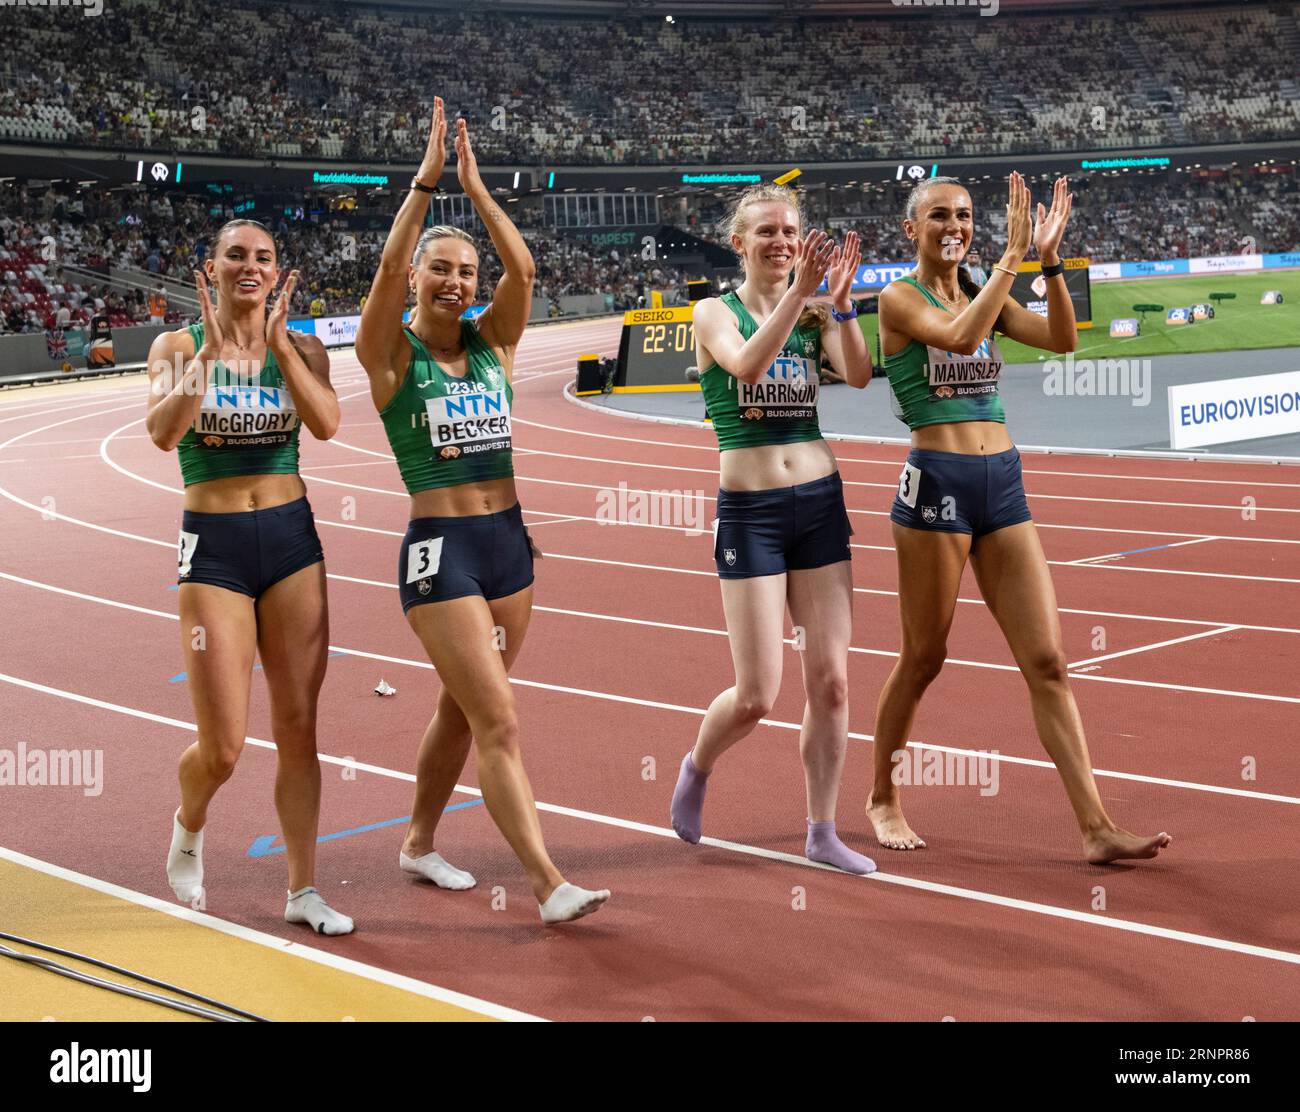 Róisin Harrison, Sophie Becker, Kelly McGrory and Sharlen Mawdsley of Ireland competing in the women’s 4x400m relay final on day 9 of the World Athlet Stock Photo